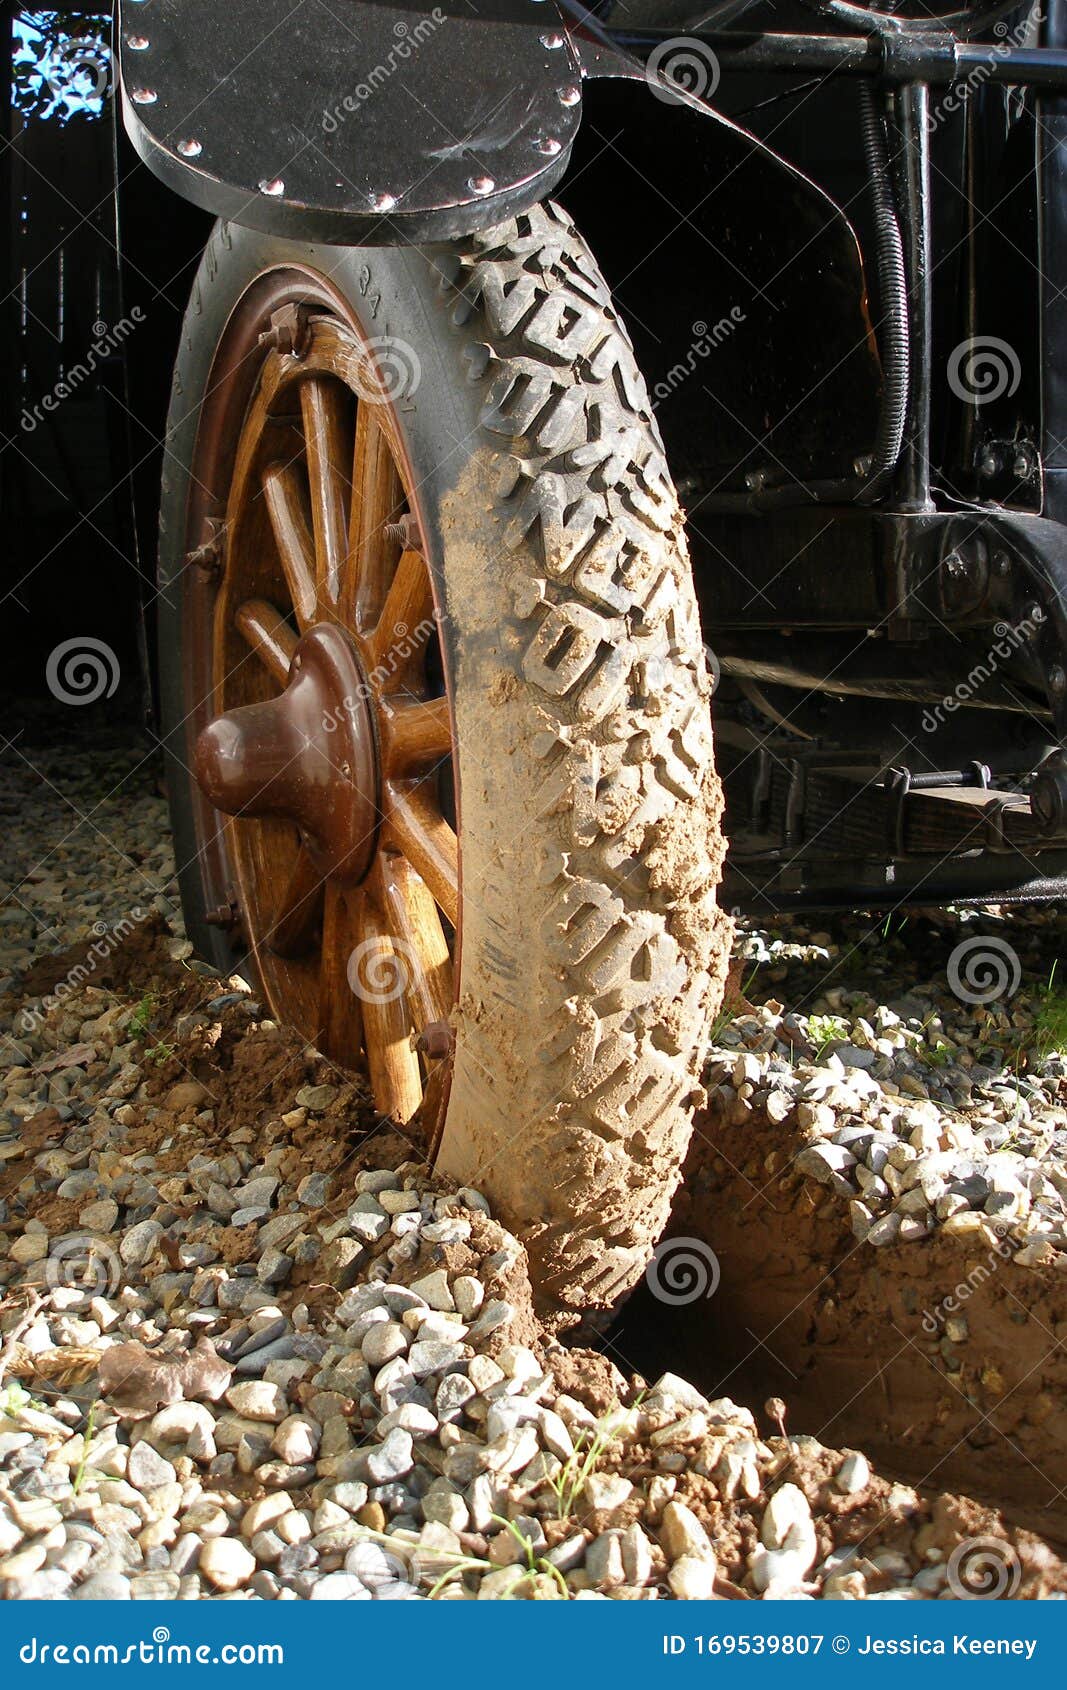 reo tire buried in mud